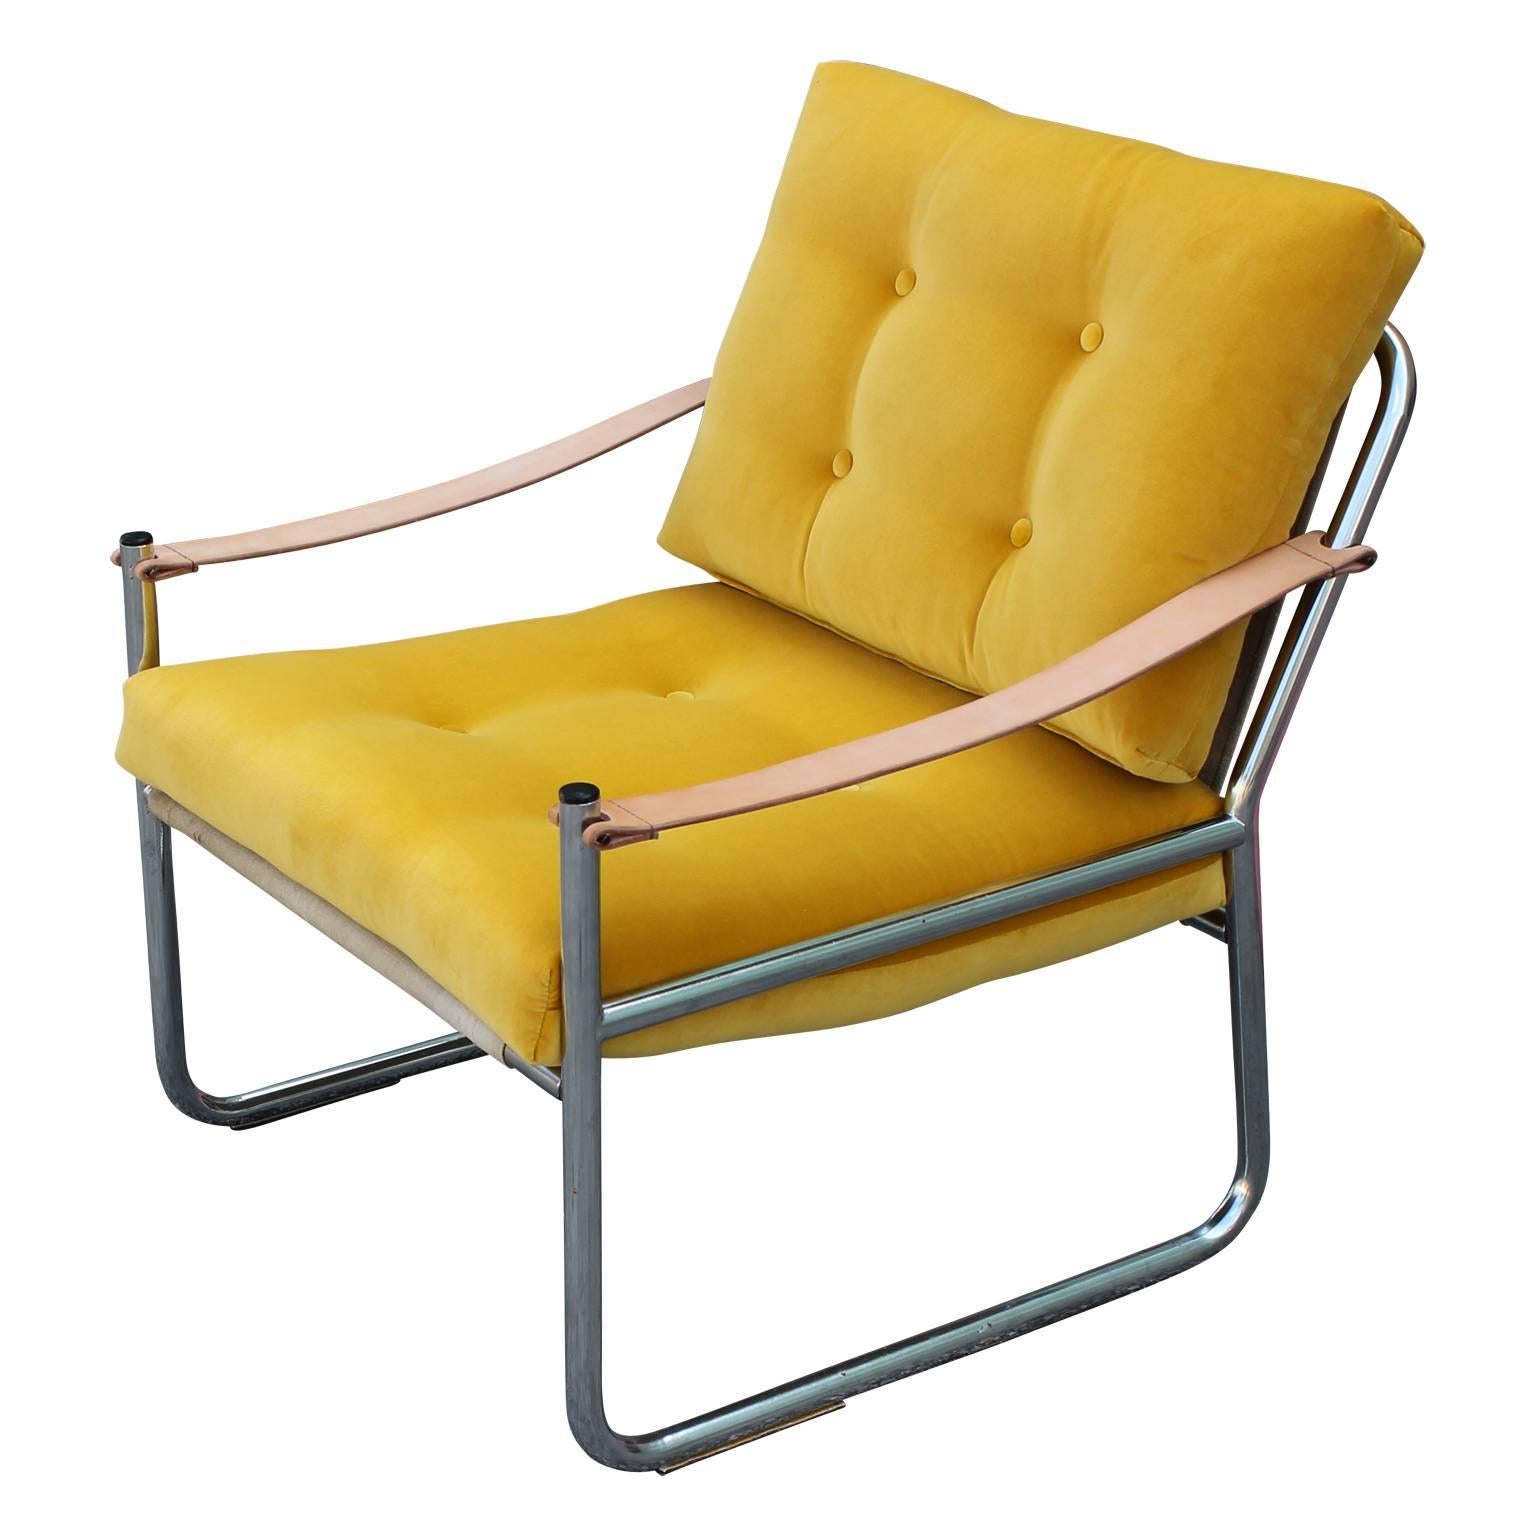 Unique pair of safari style Danish lounge chairs with a thick tubular chrome-plated frame, that we had upholstered in a rich yellow Kravet velvet. New leather straps as the arm rests as well. The canvas is original and in nice condition with very